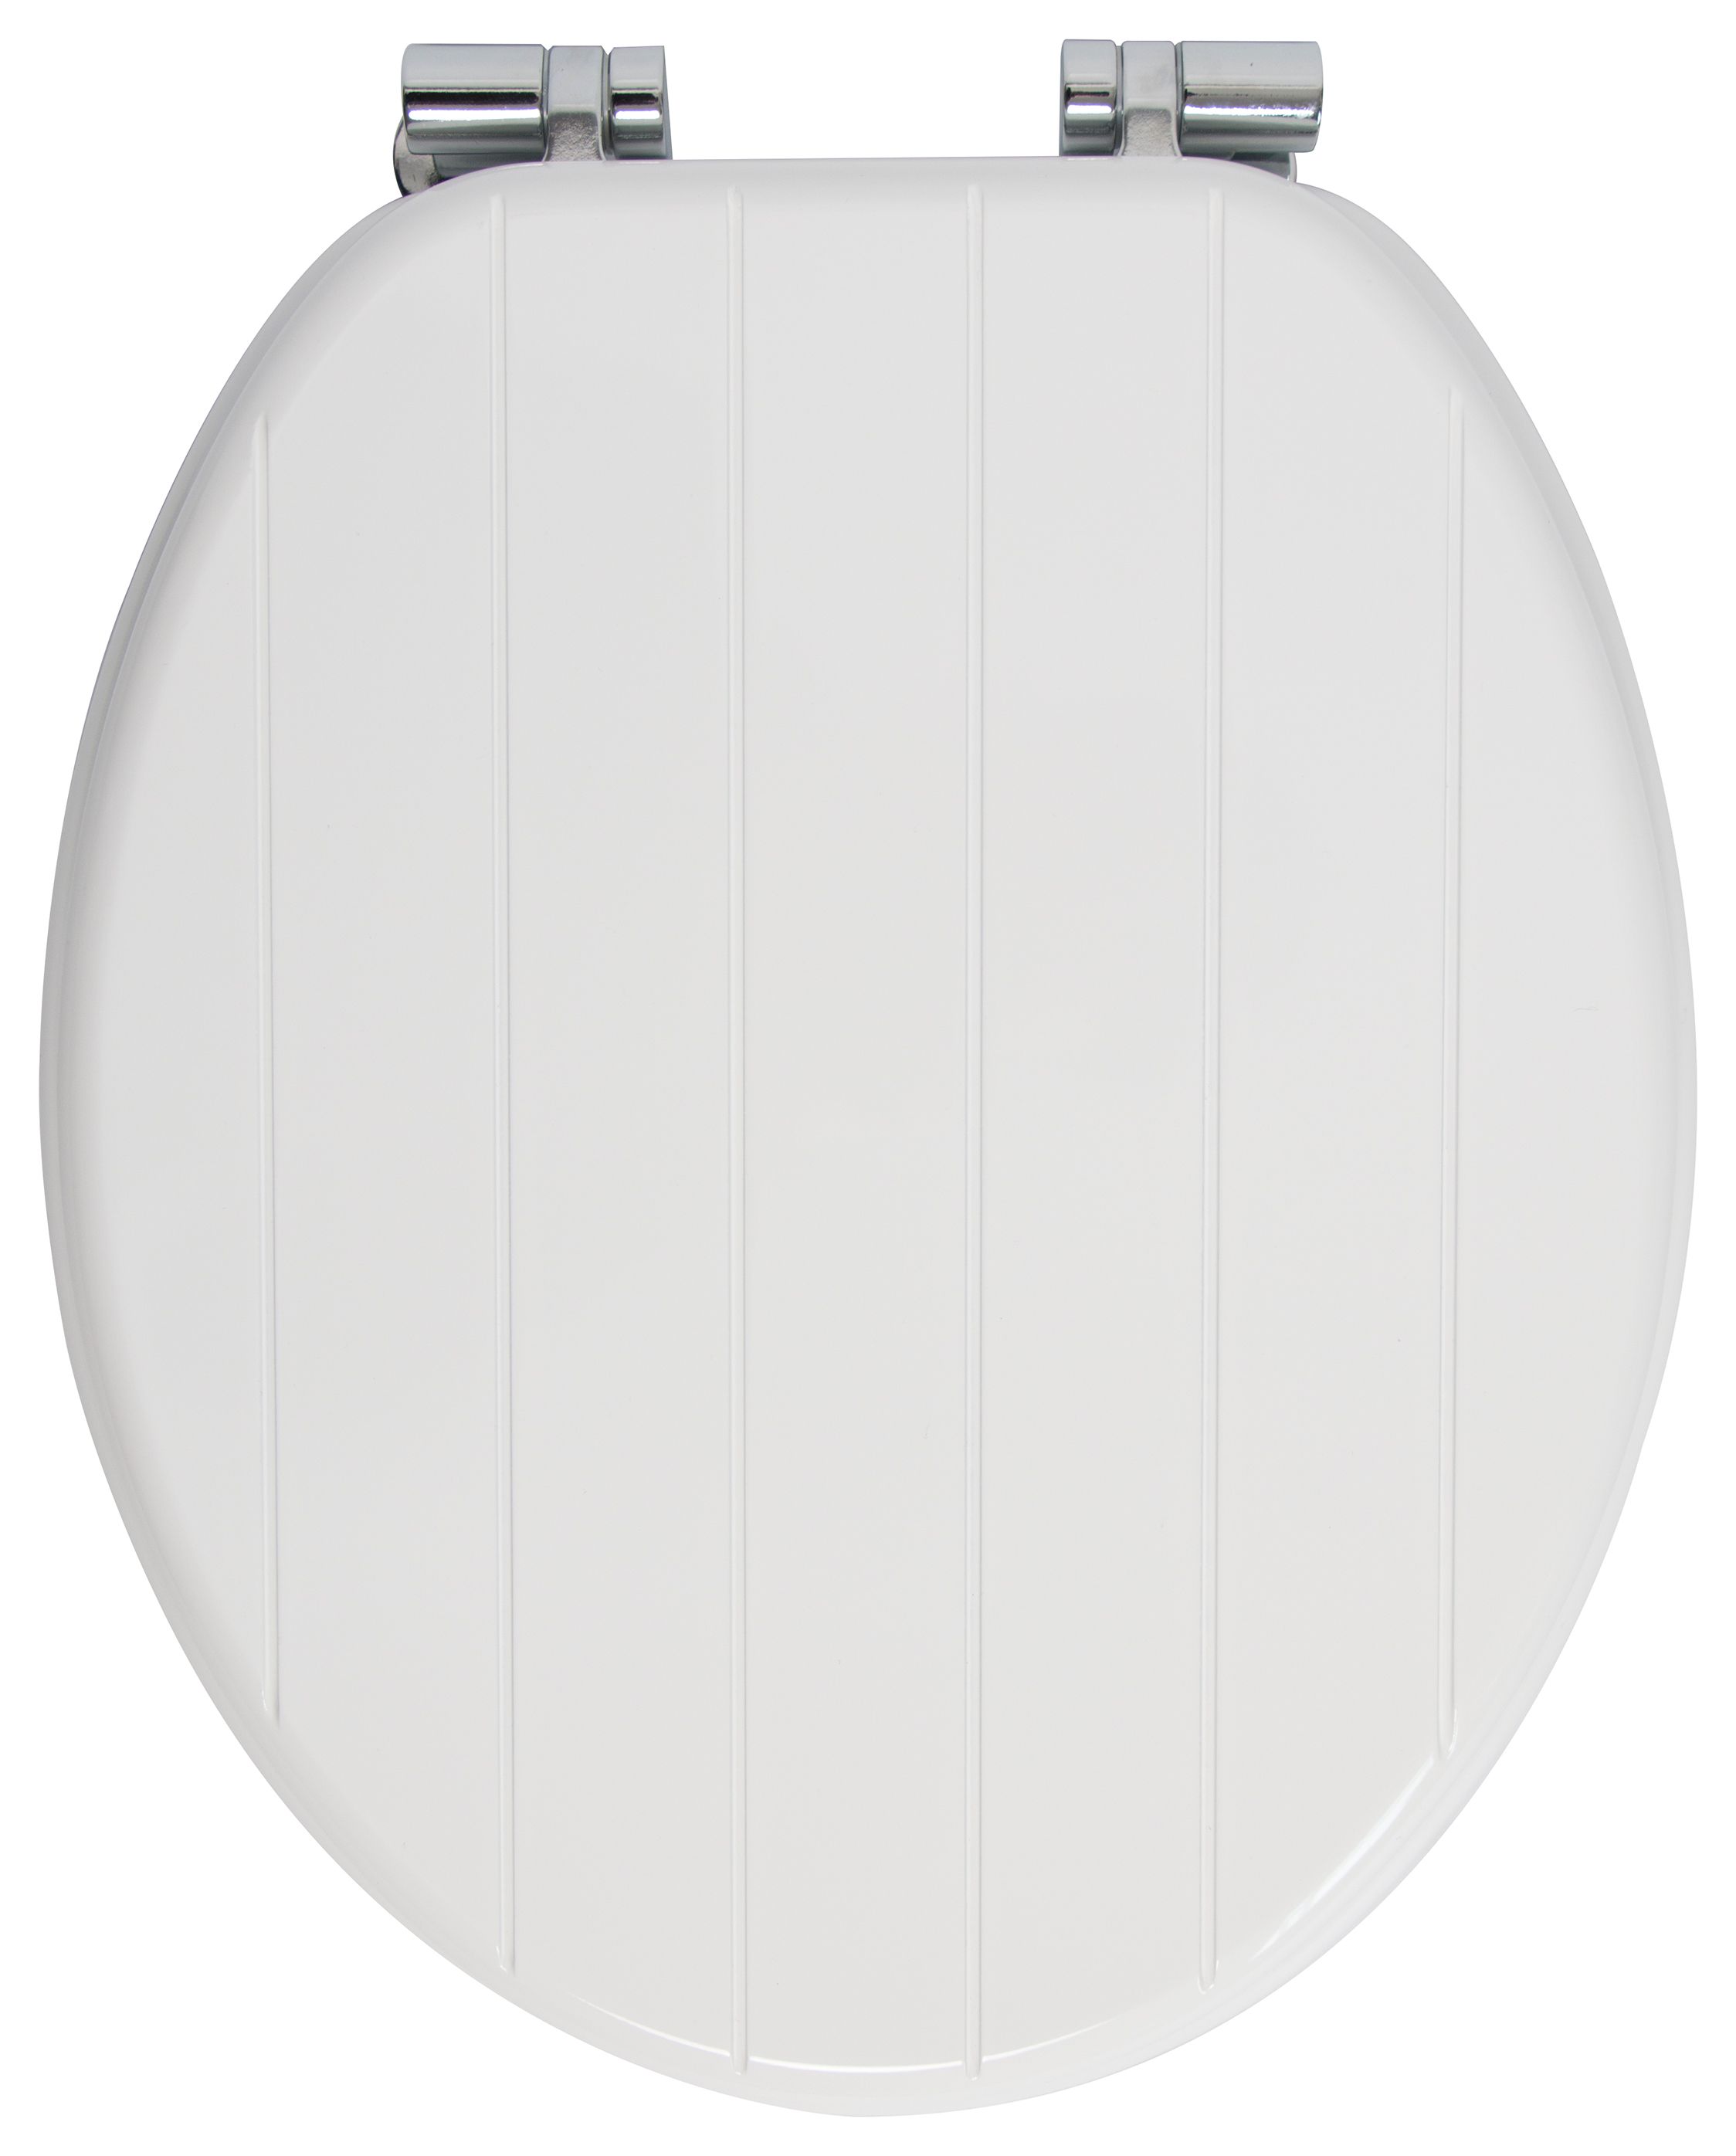 Image of Wickes Tongue & Groove Wood Effect Soft Close Toilet Seat - White